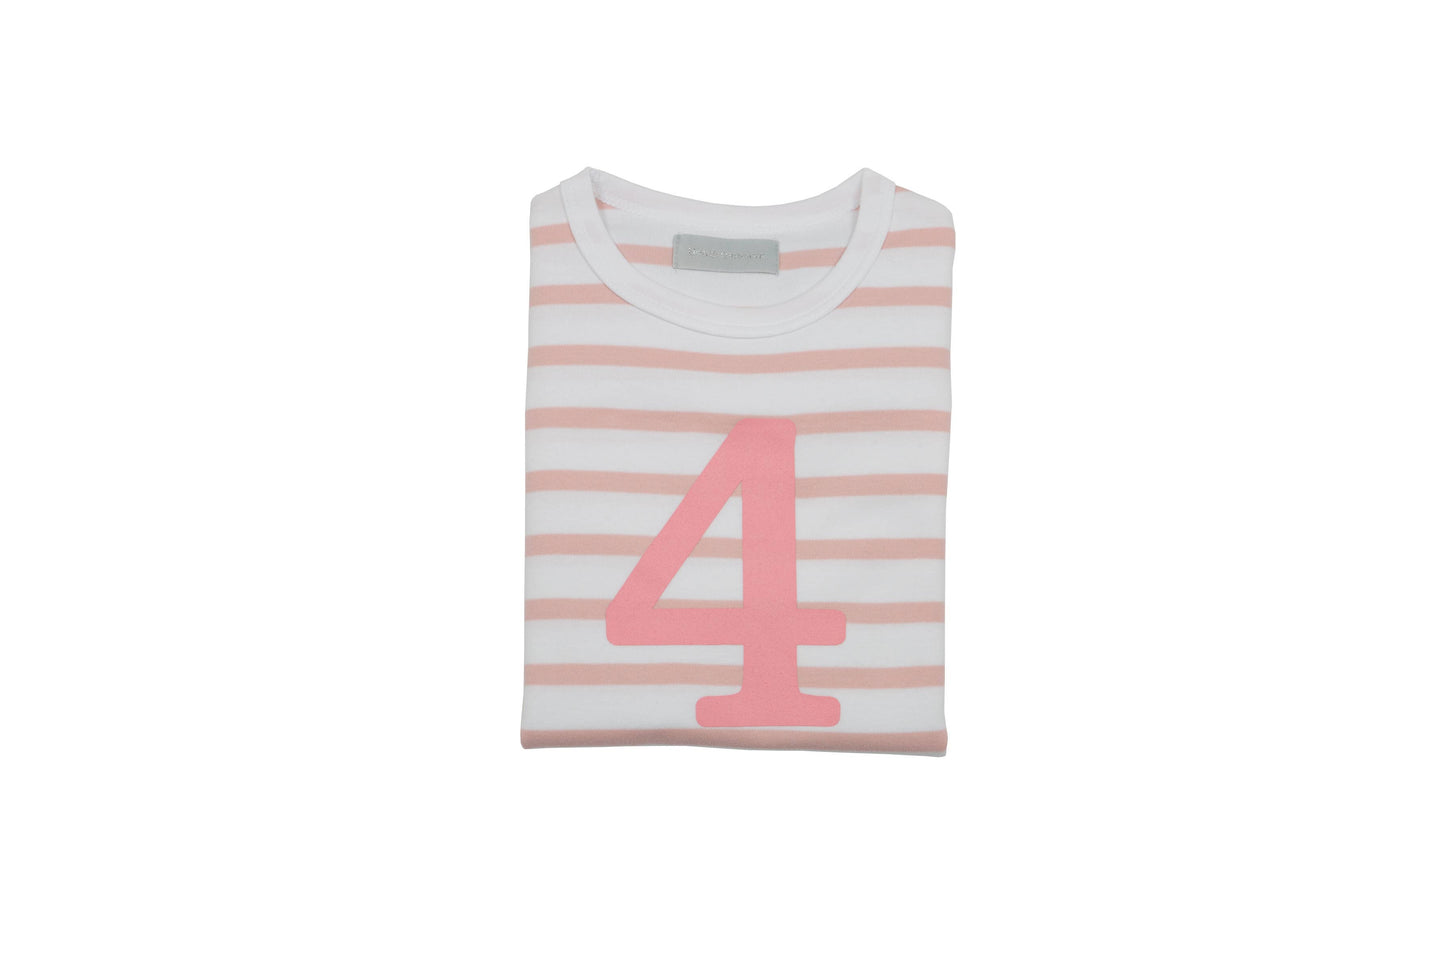 Dusty Pink & White Striped 4 (Pink) Shirt